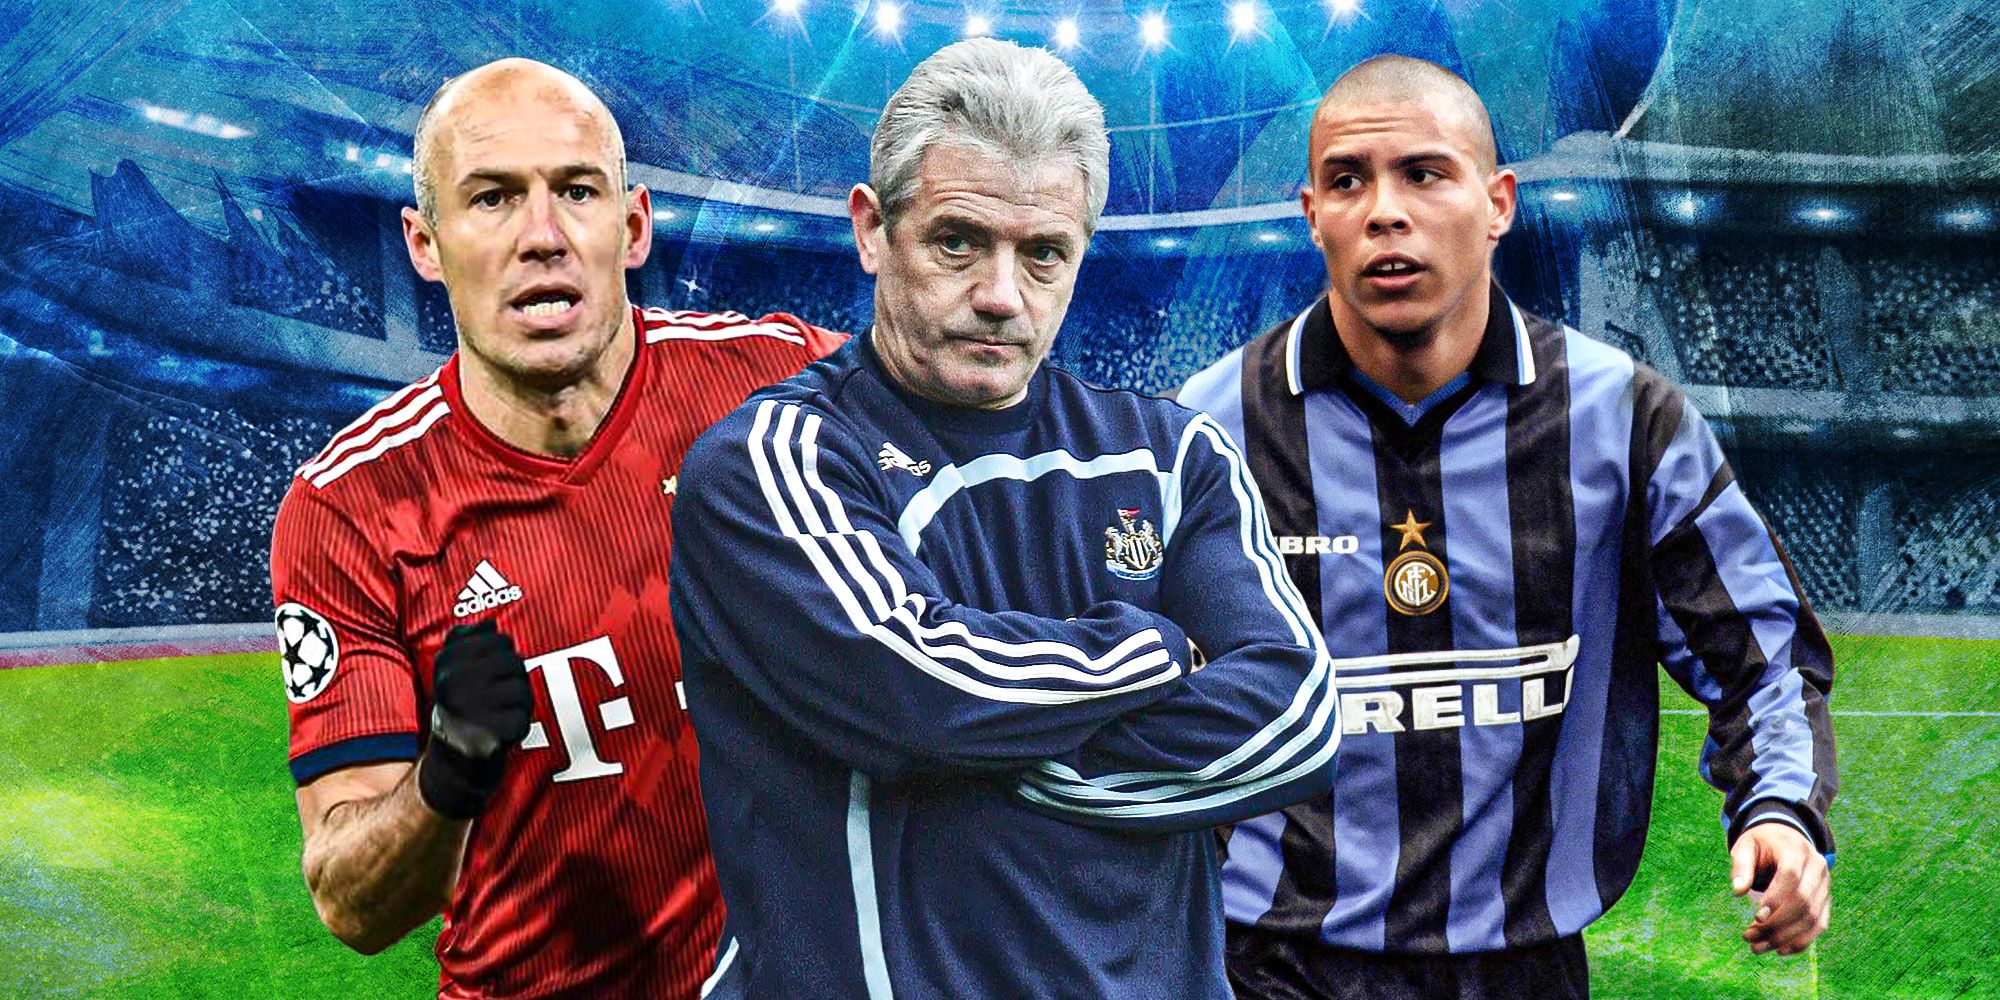 Featured Image for Europe's biggest title collapses featuring Bayern Munich's Arjen Robben, Newcastle United manager Kevin Keegan and Inter Milan's Ronaldo.